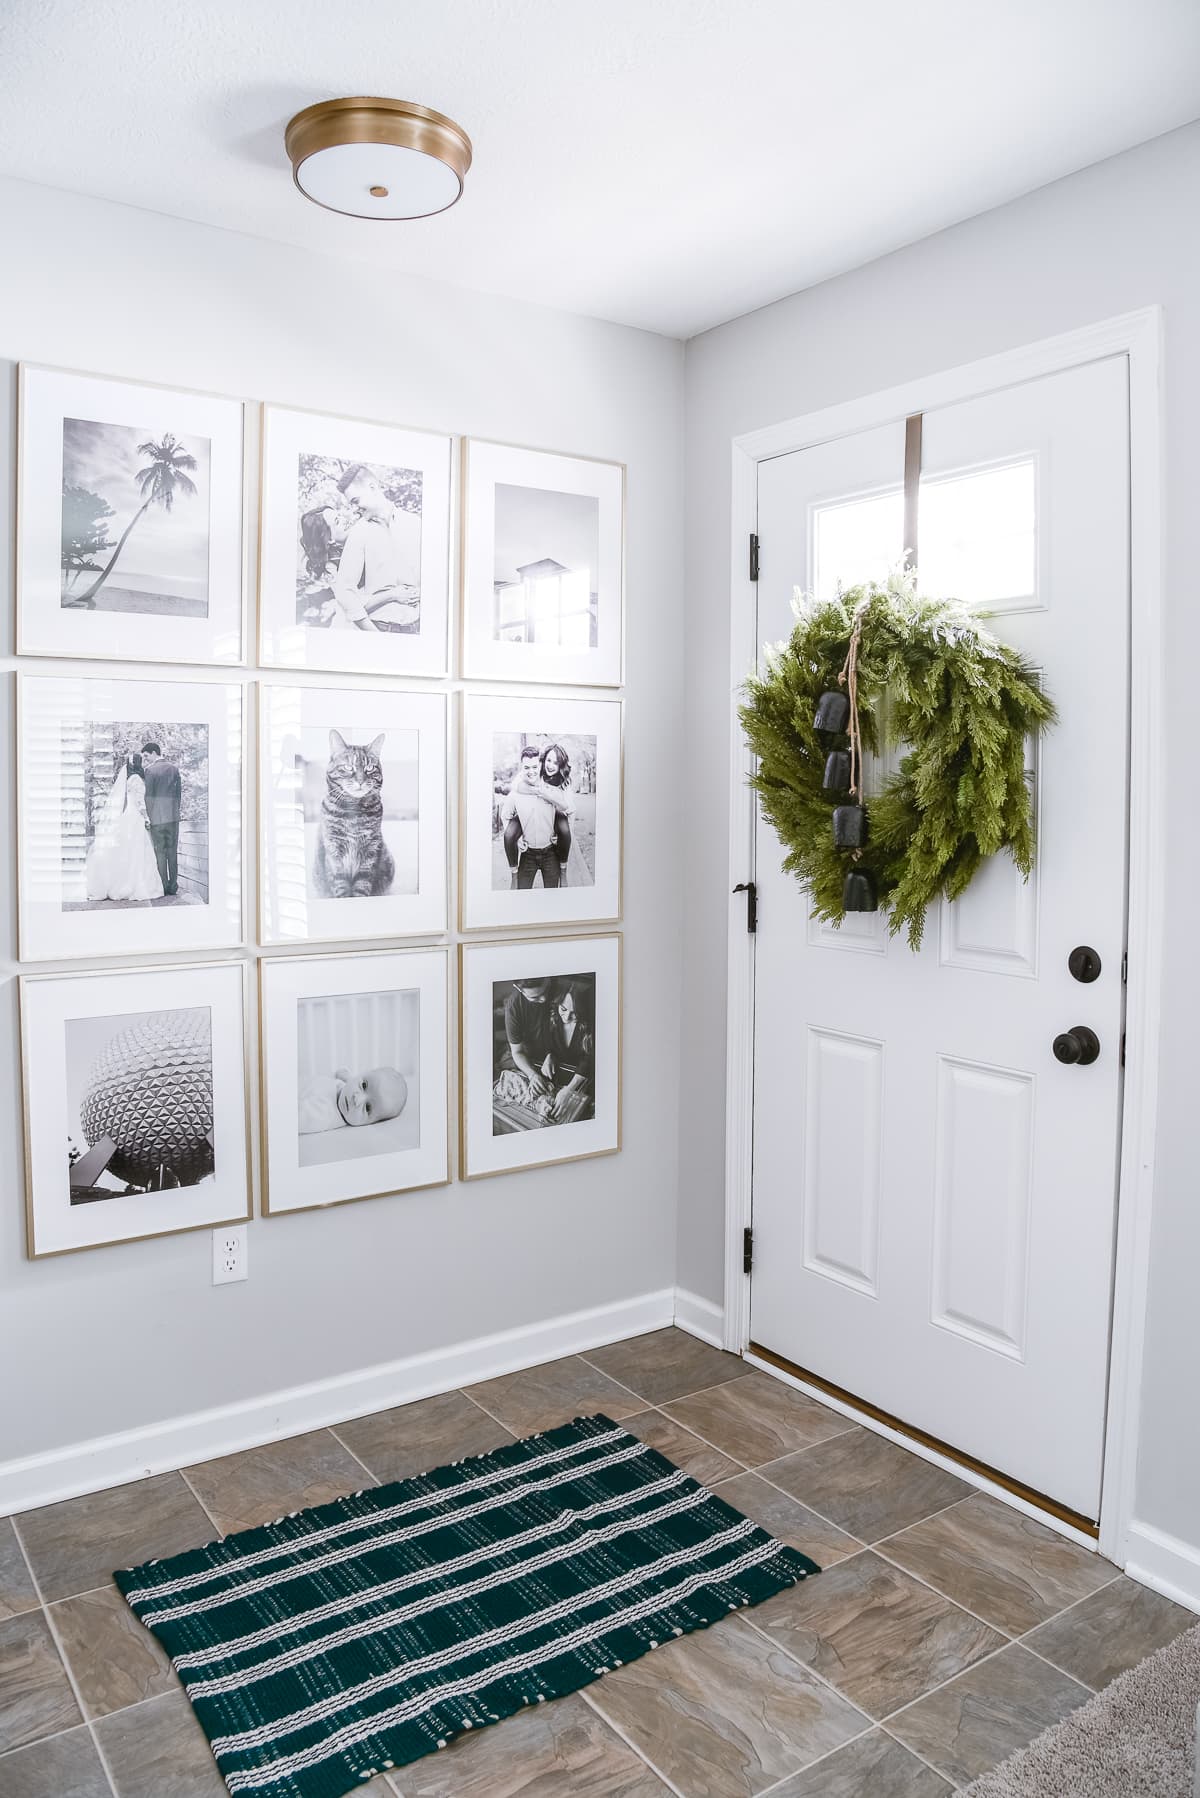 Gallery Wall: How to create a stylish and personal gallery wall